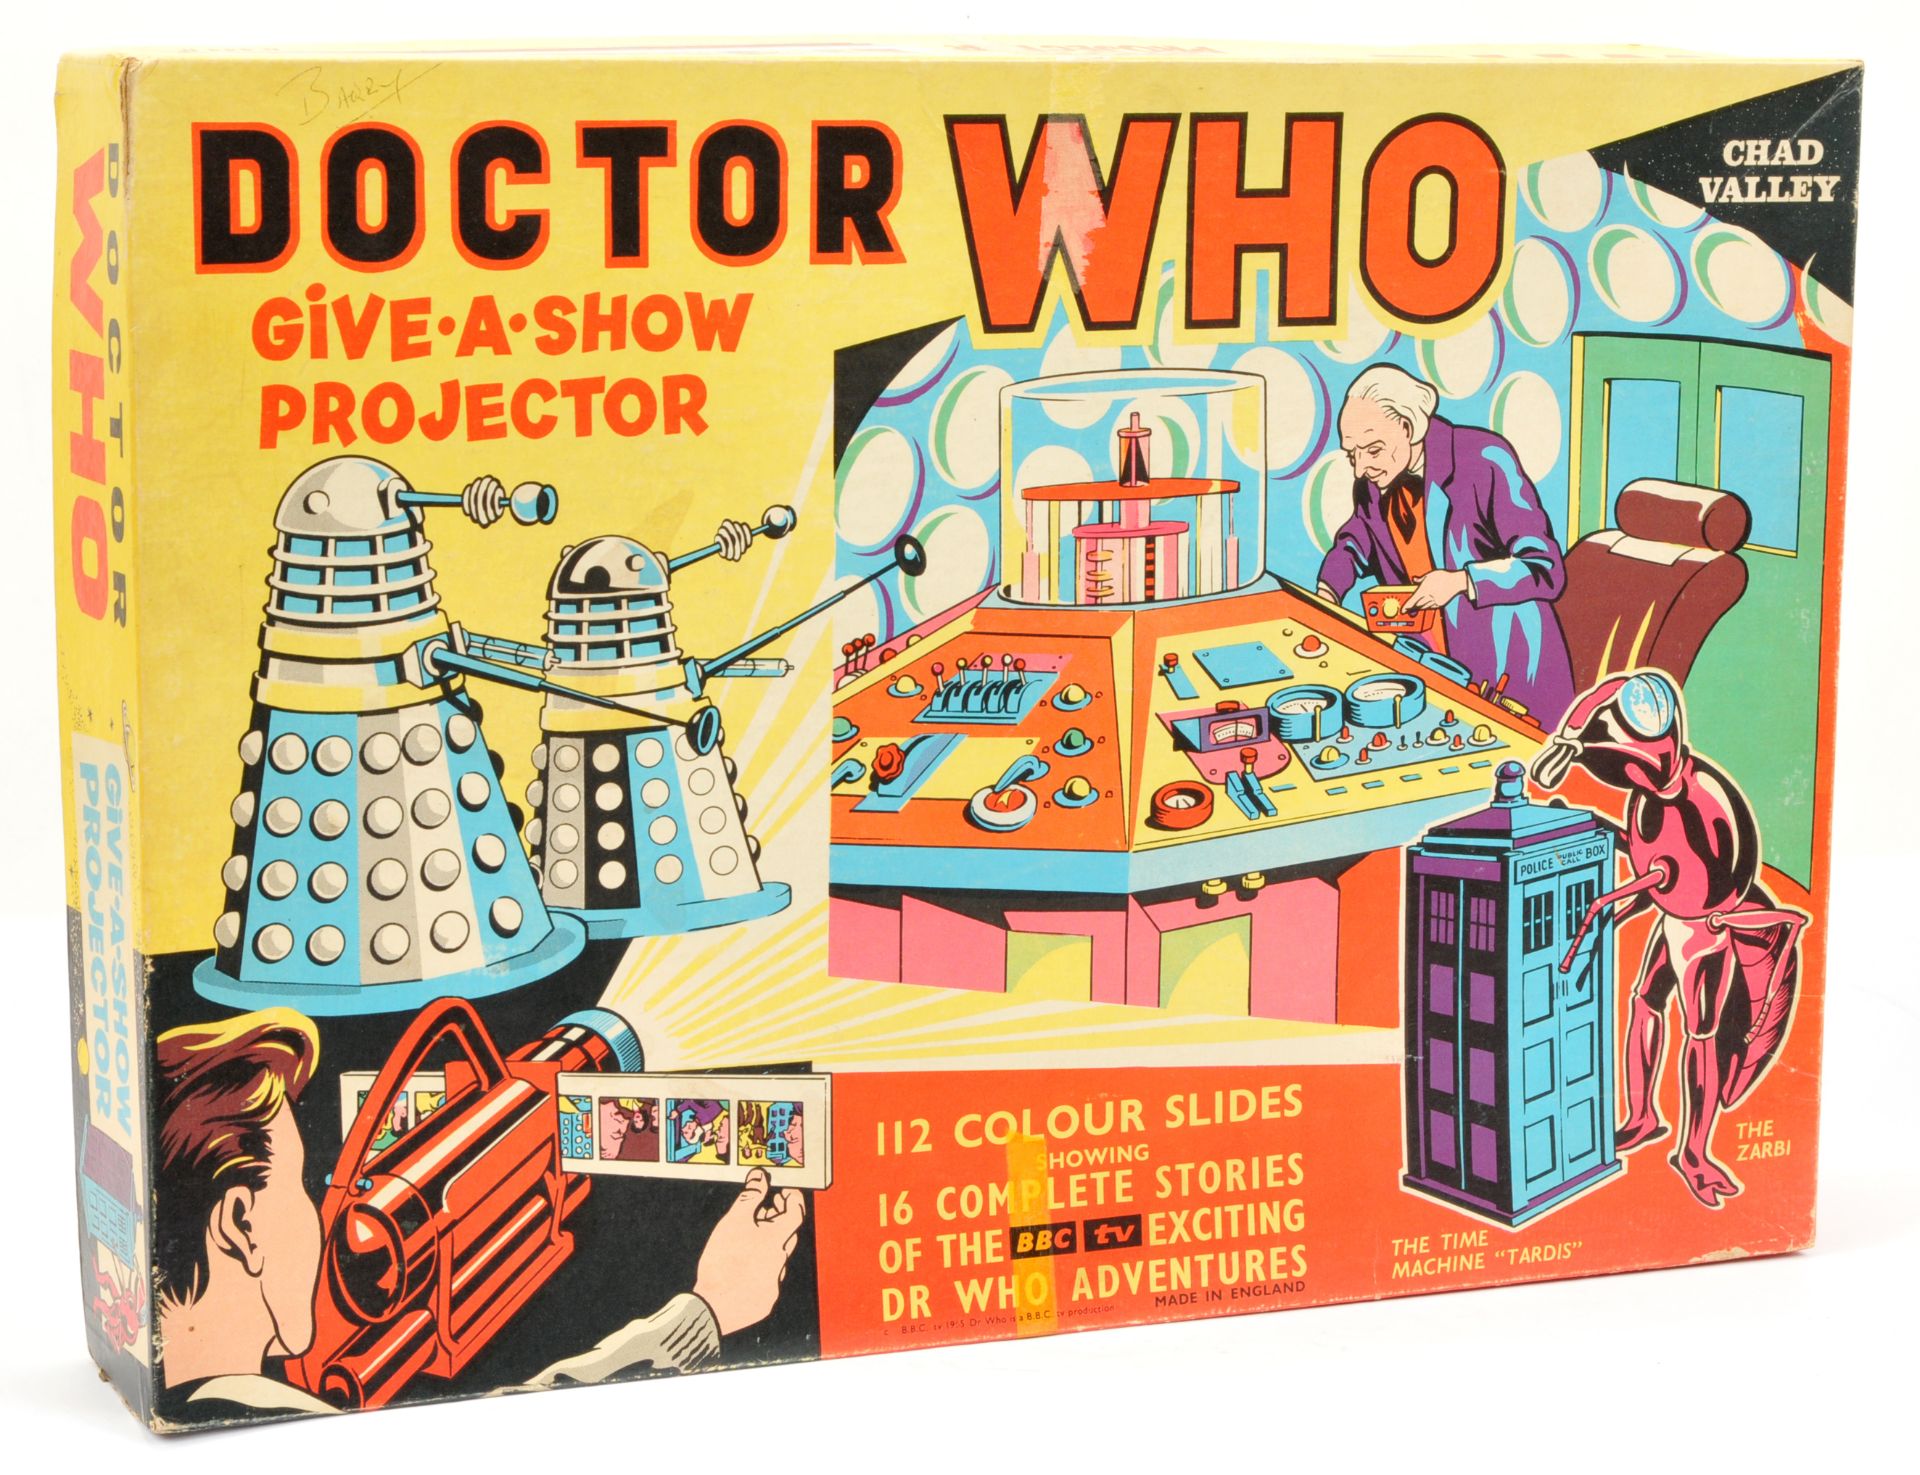 Chad Valley Doctor Who Projector which is red plastic with 16 colour slides